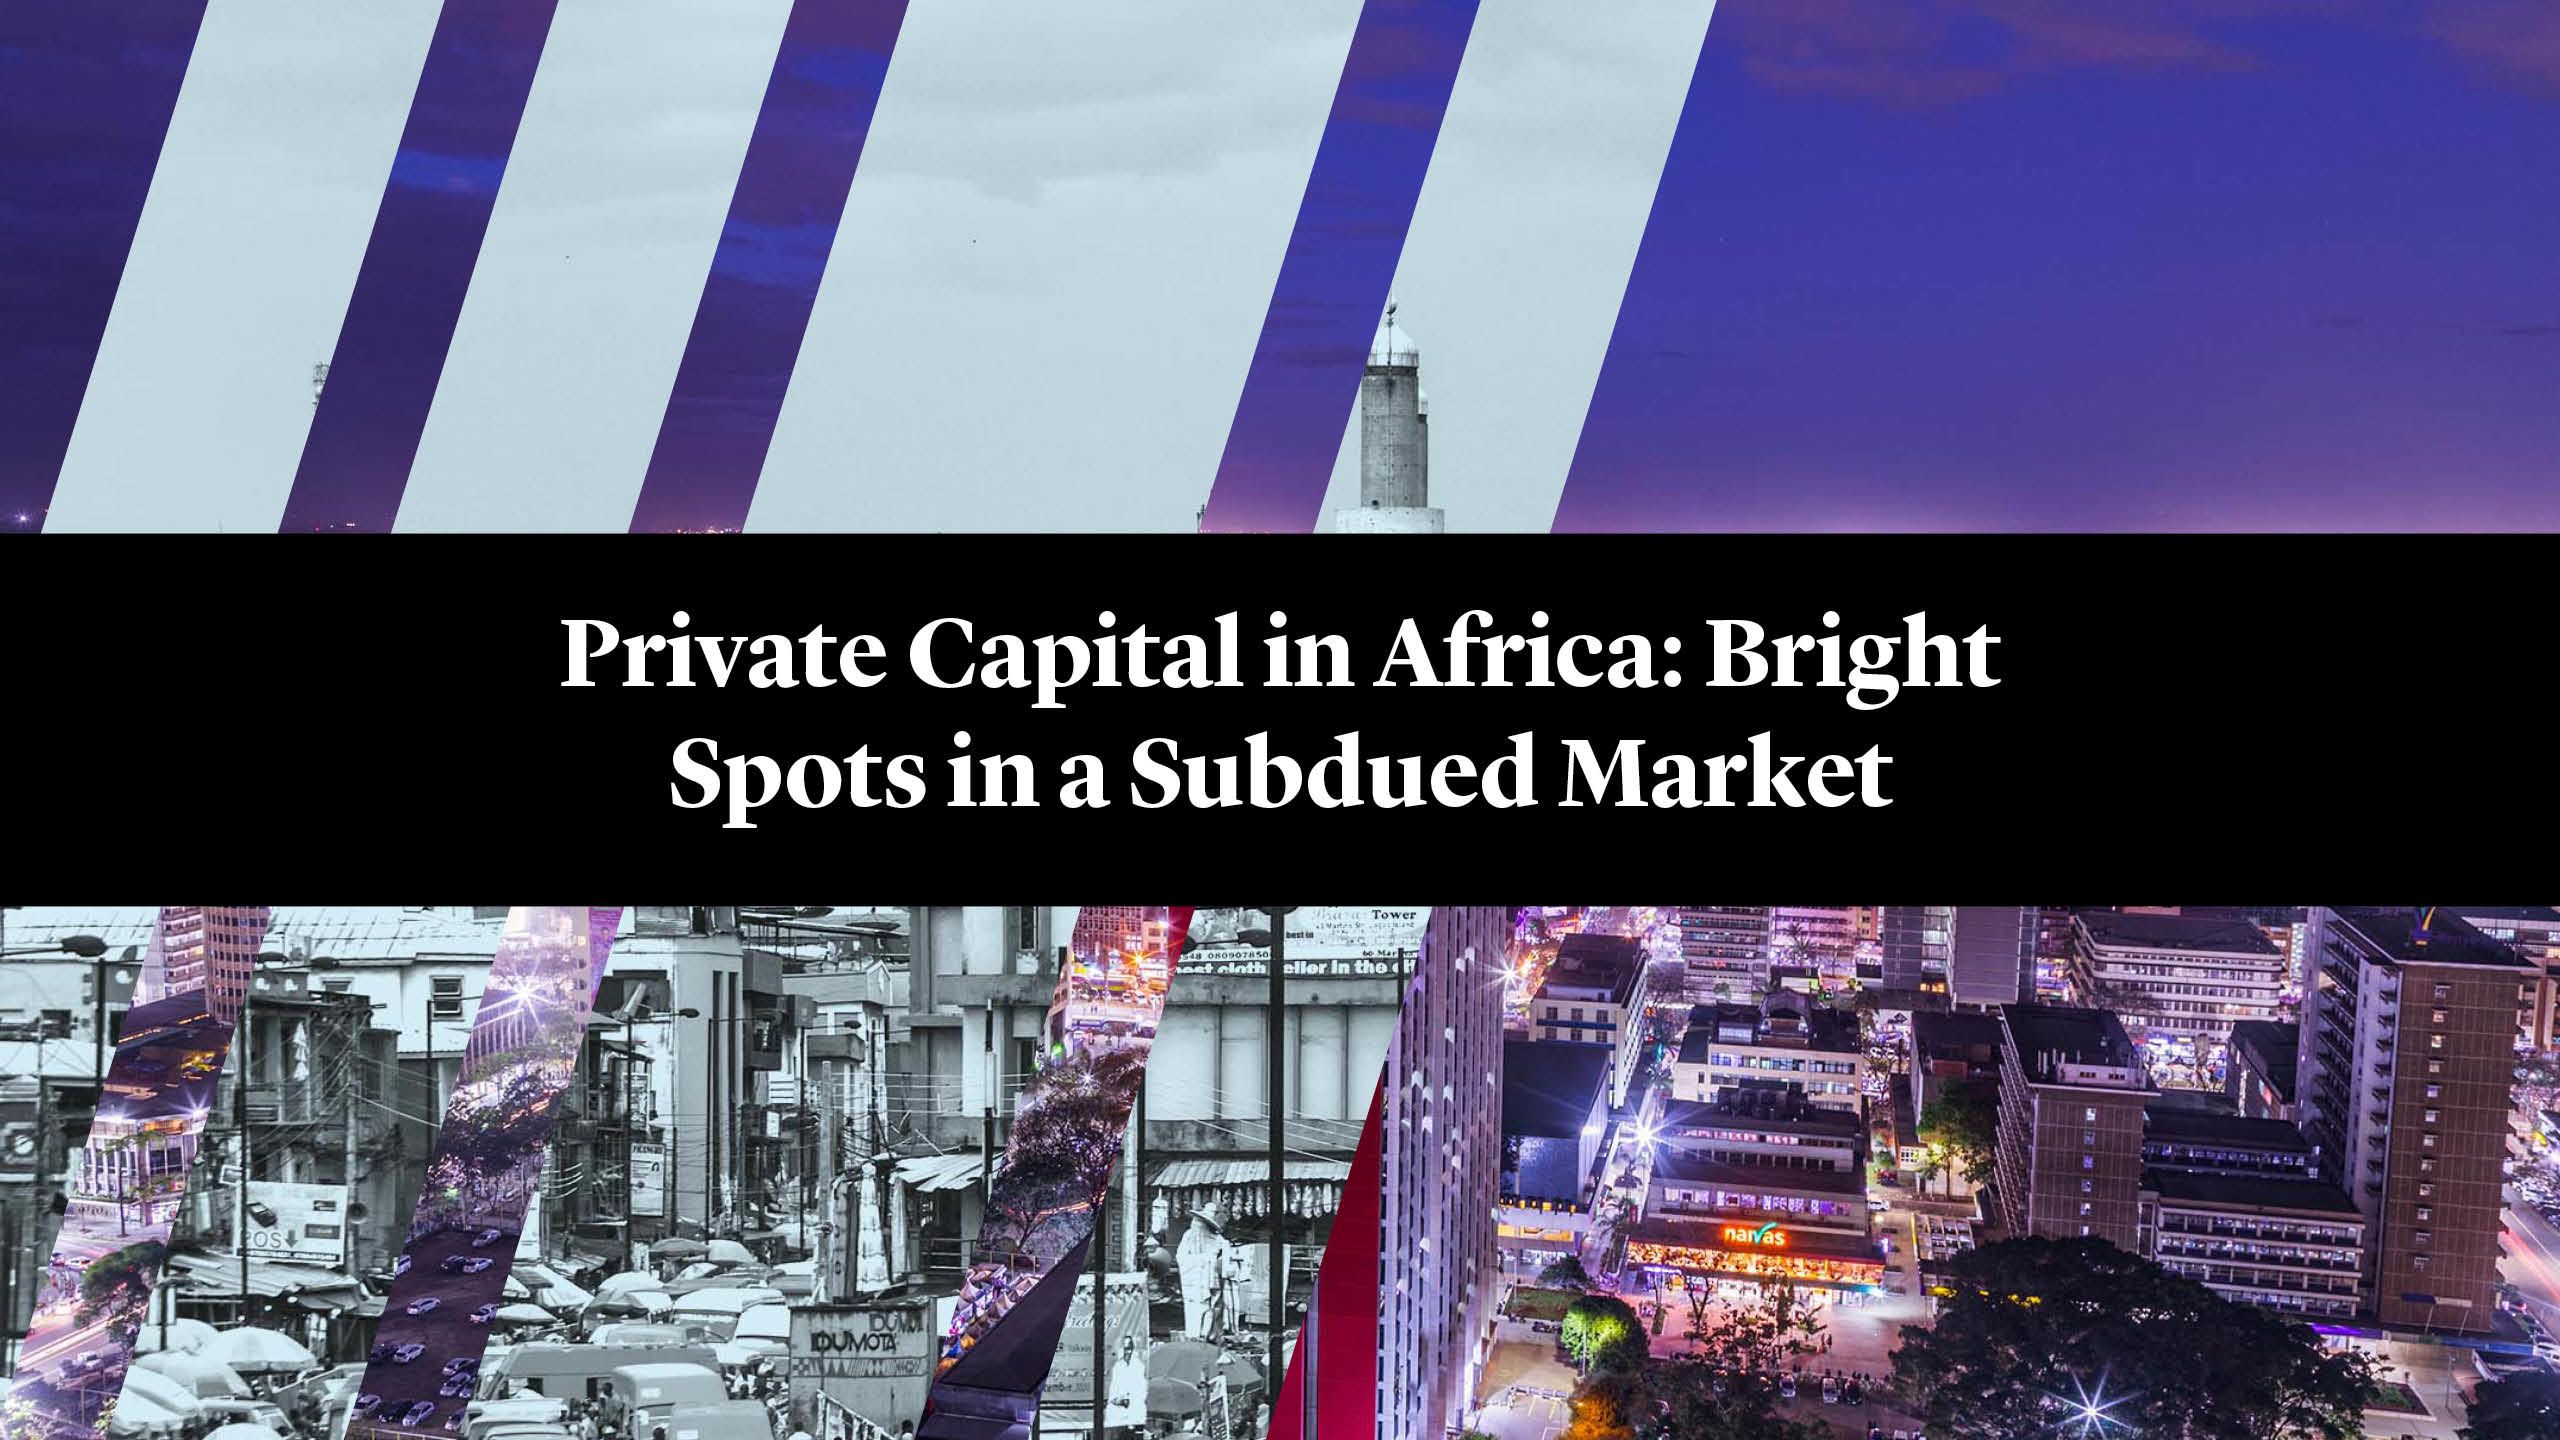 Private Capital in Africa: Bright Spots in a Subdued Market